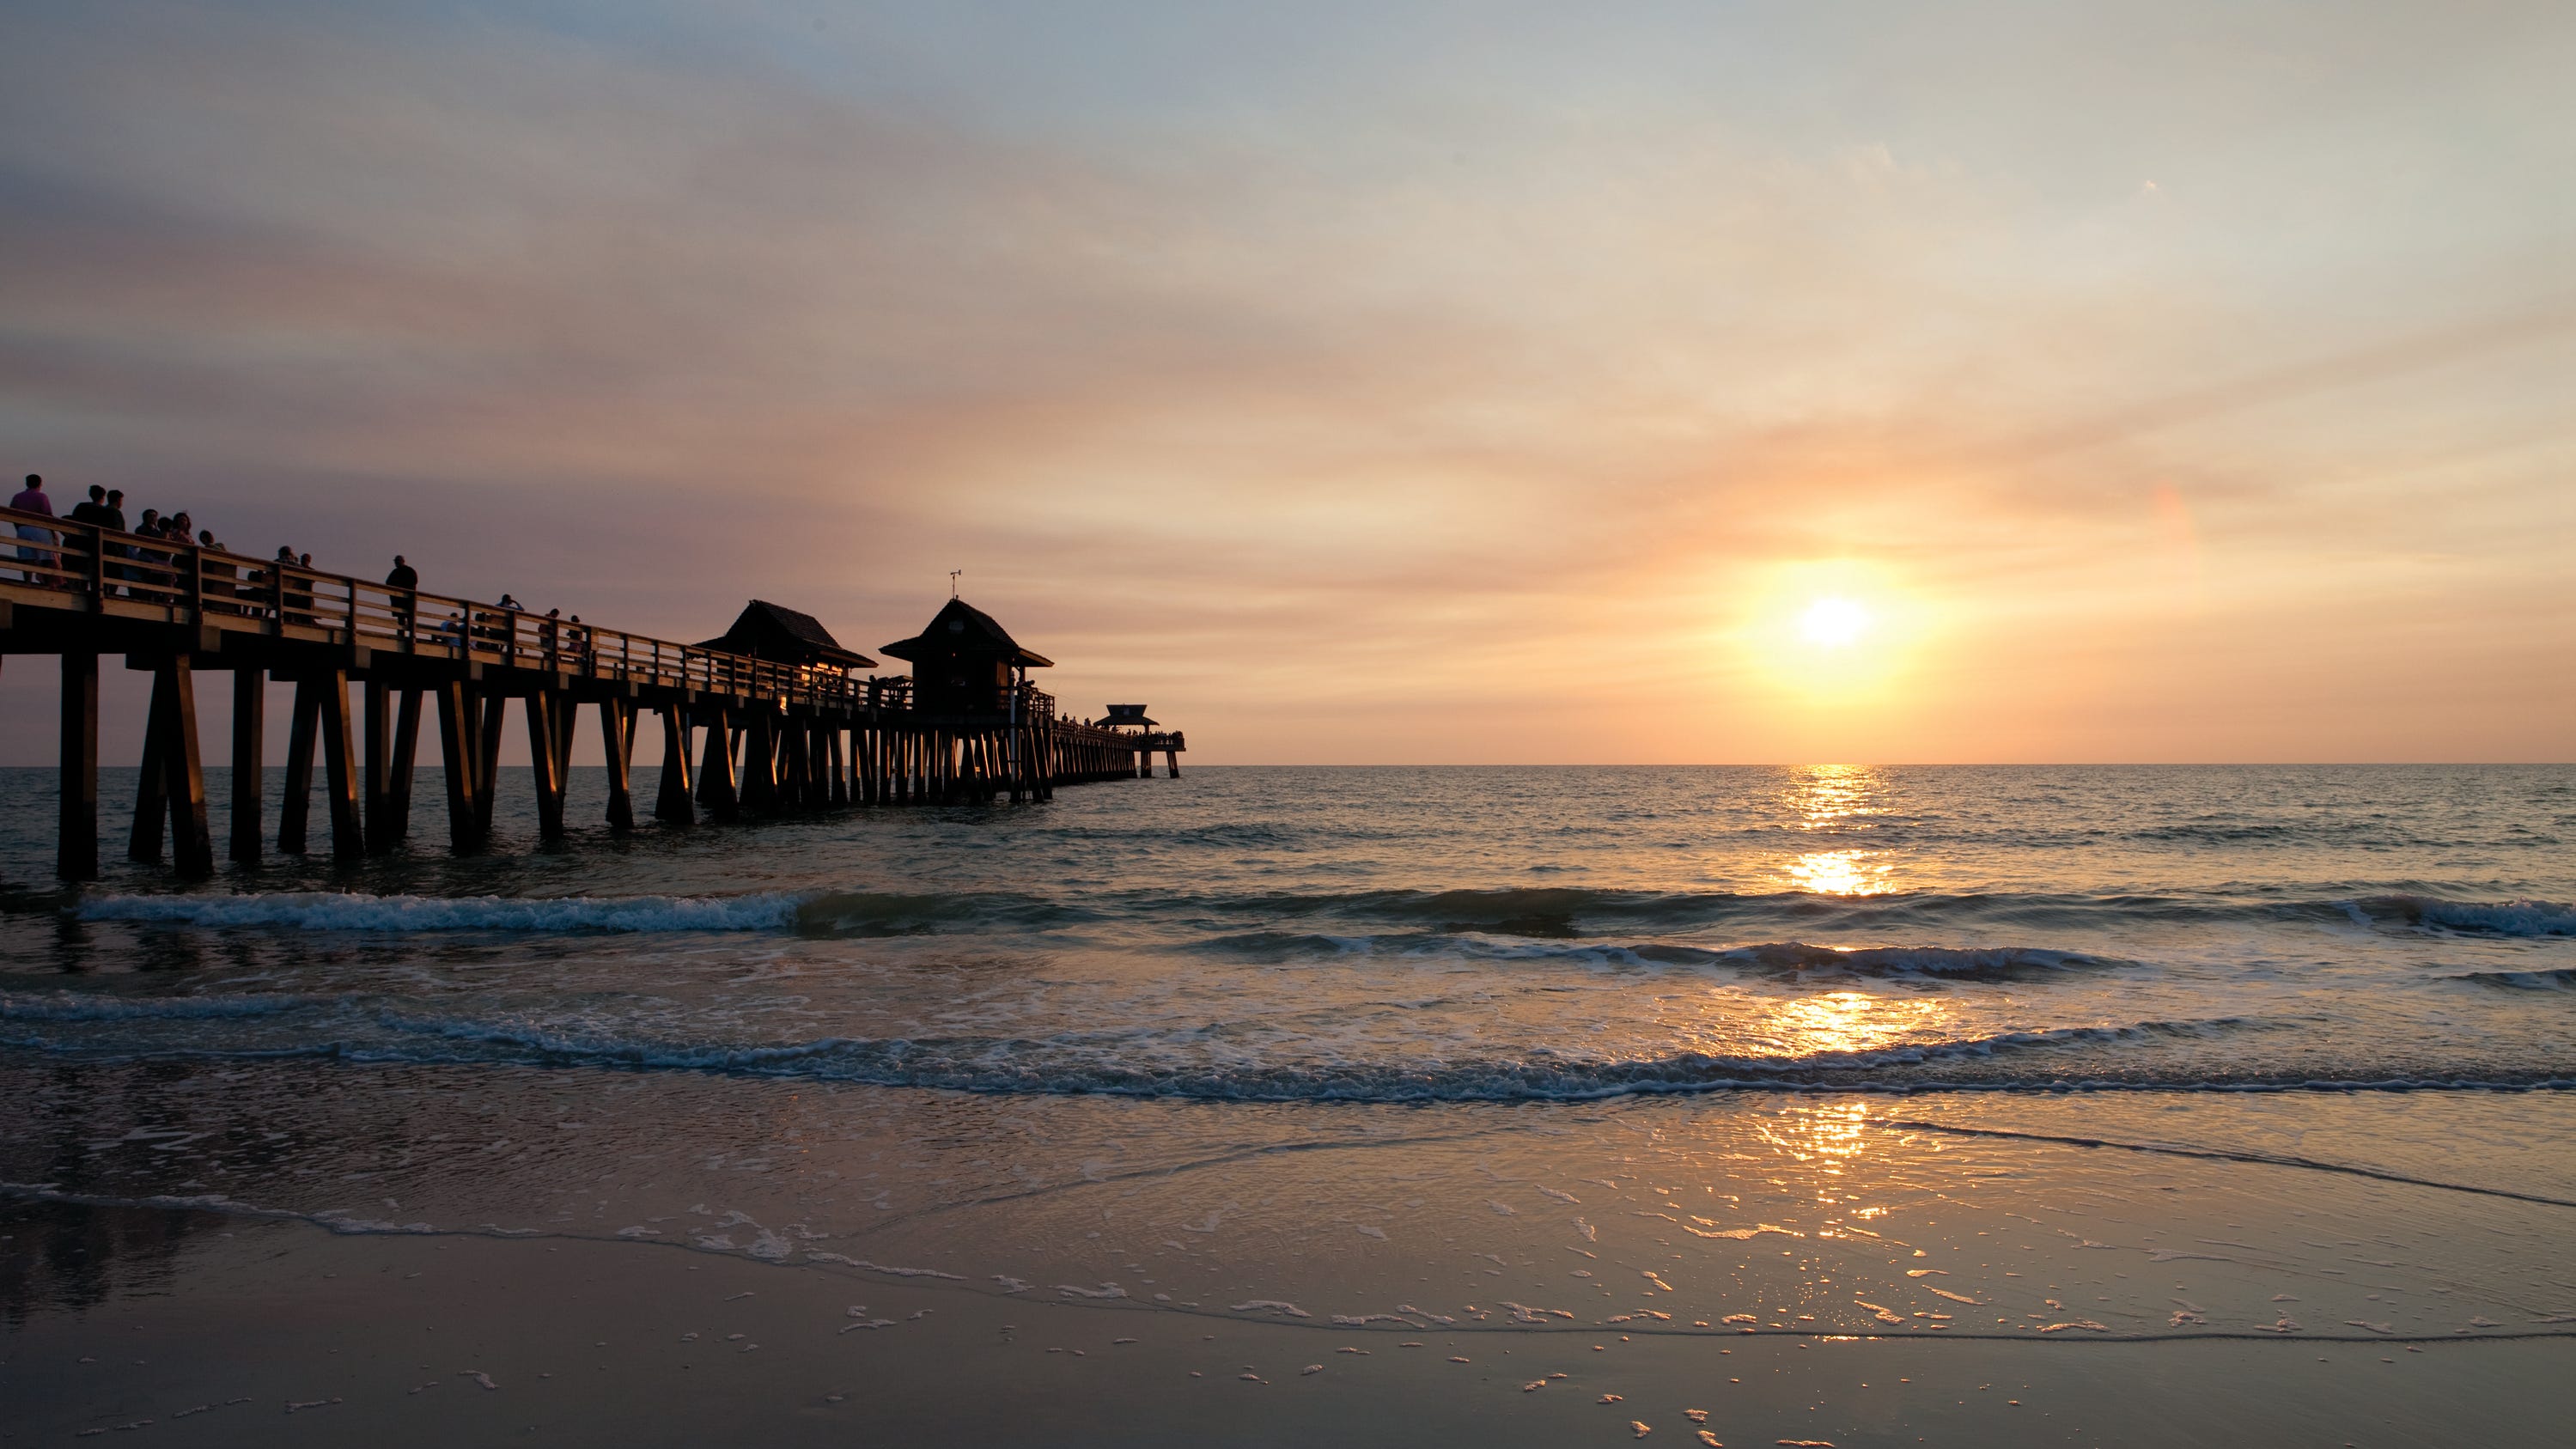 The sun sets over the Gulf of Mexico and Naples Pier, a free attraction for fishing, strolling or just relaxing.